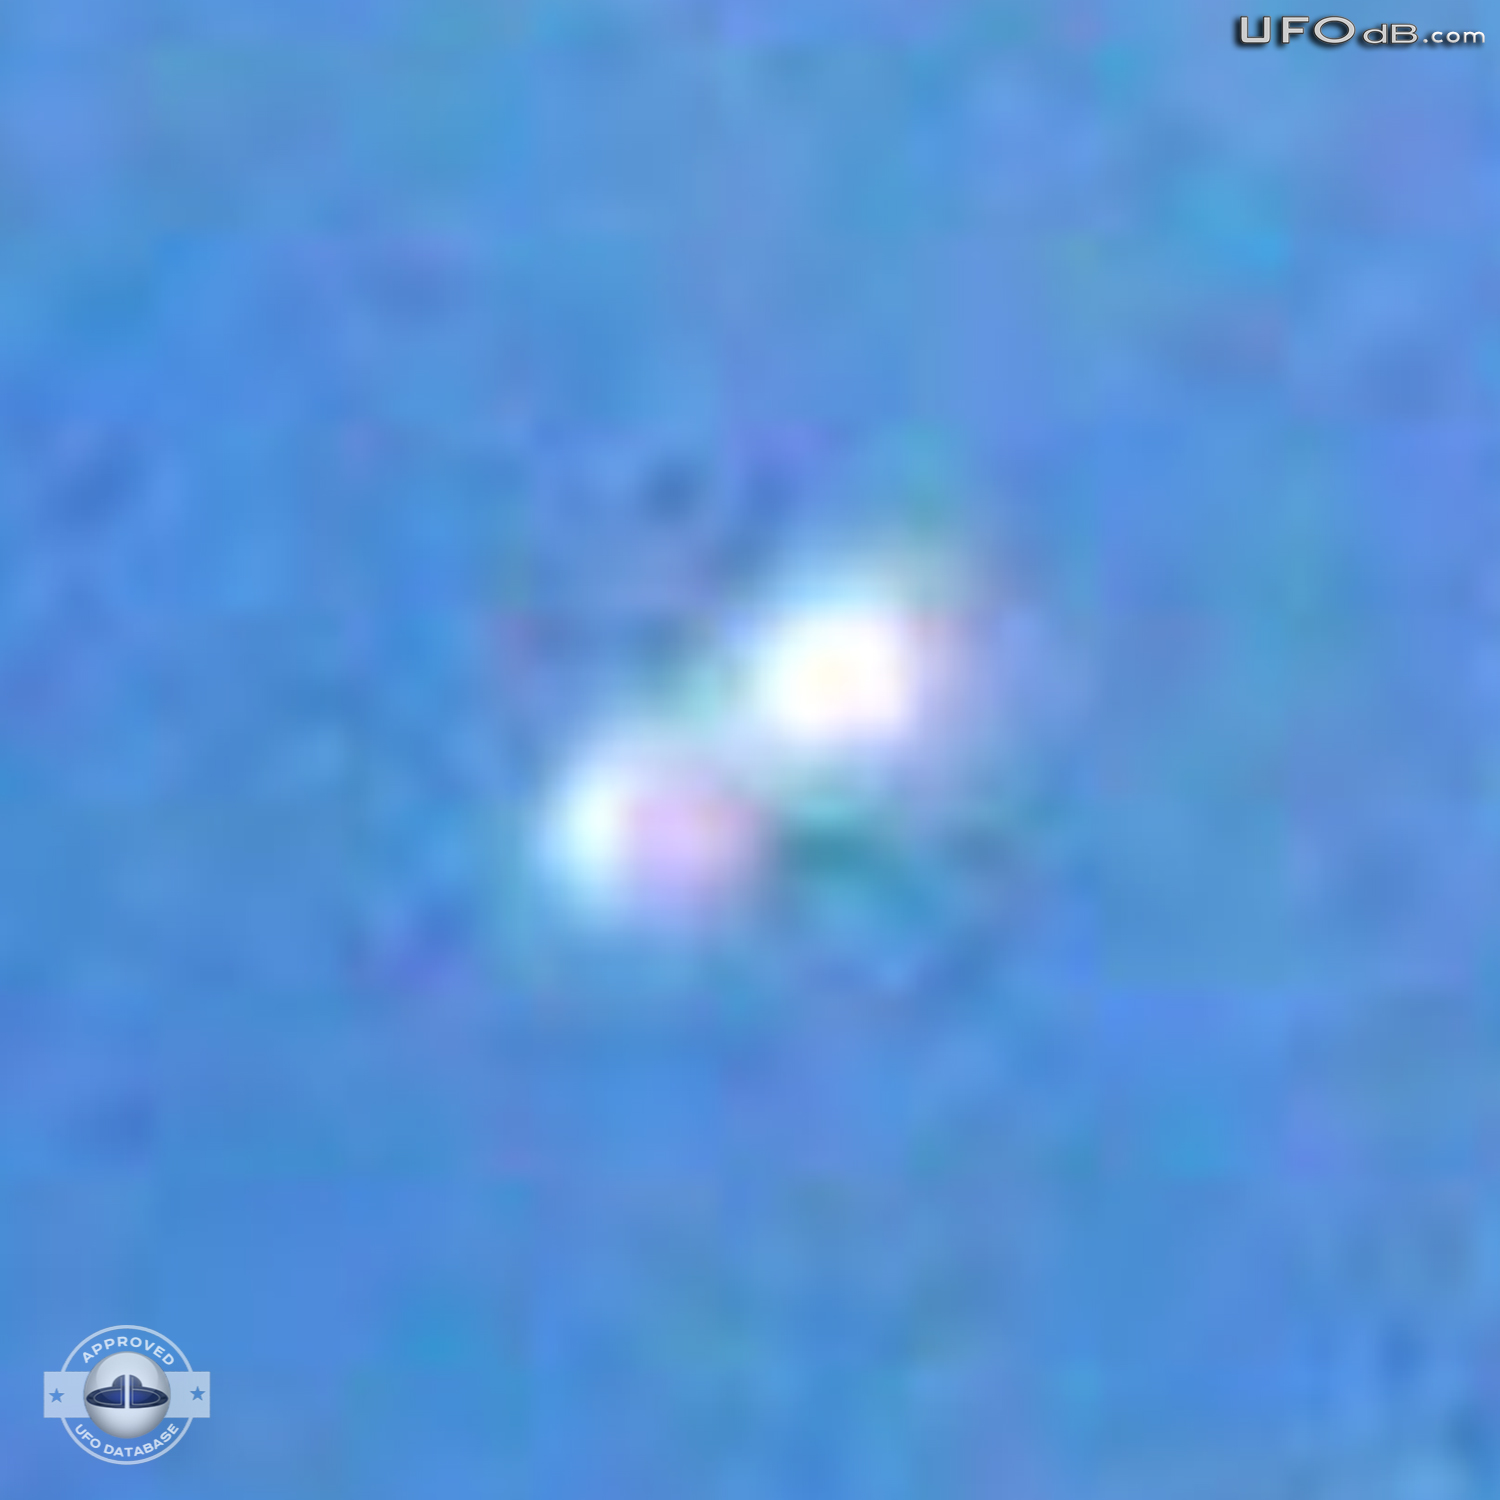 Kids run into the house after UFO sighting | Littleton USA April 2011 UFO Picture #274-4